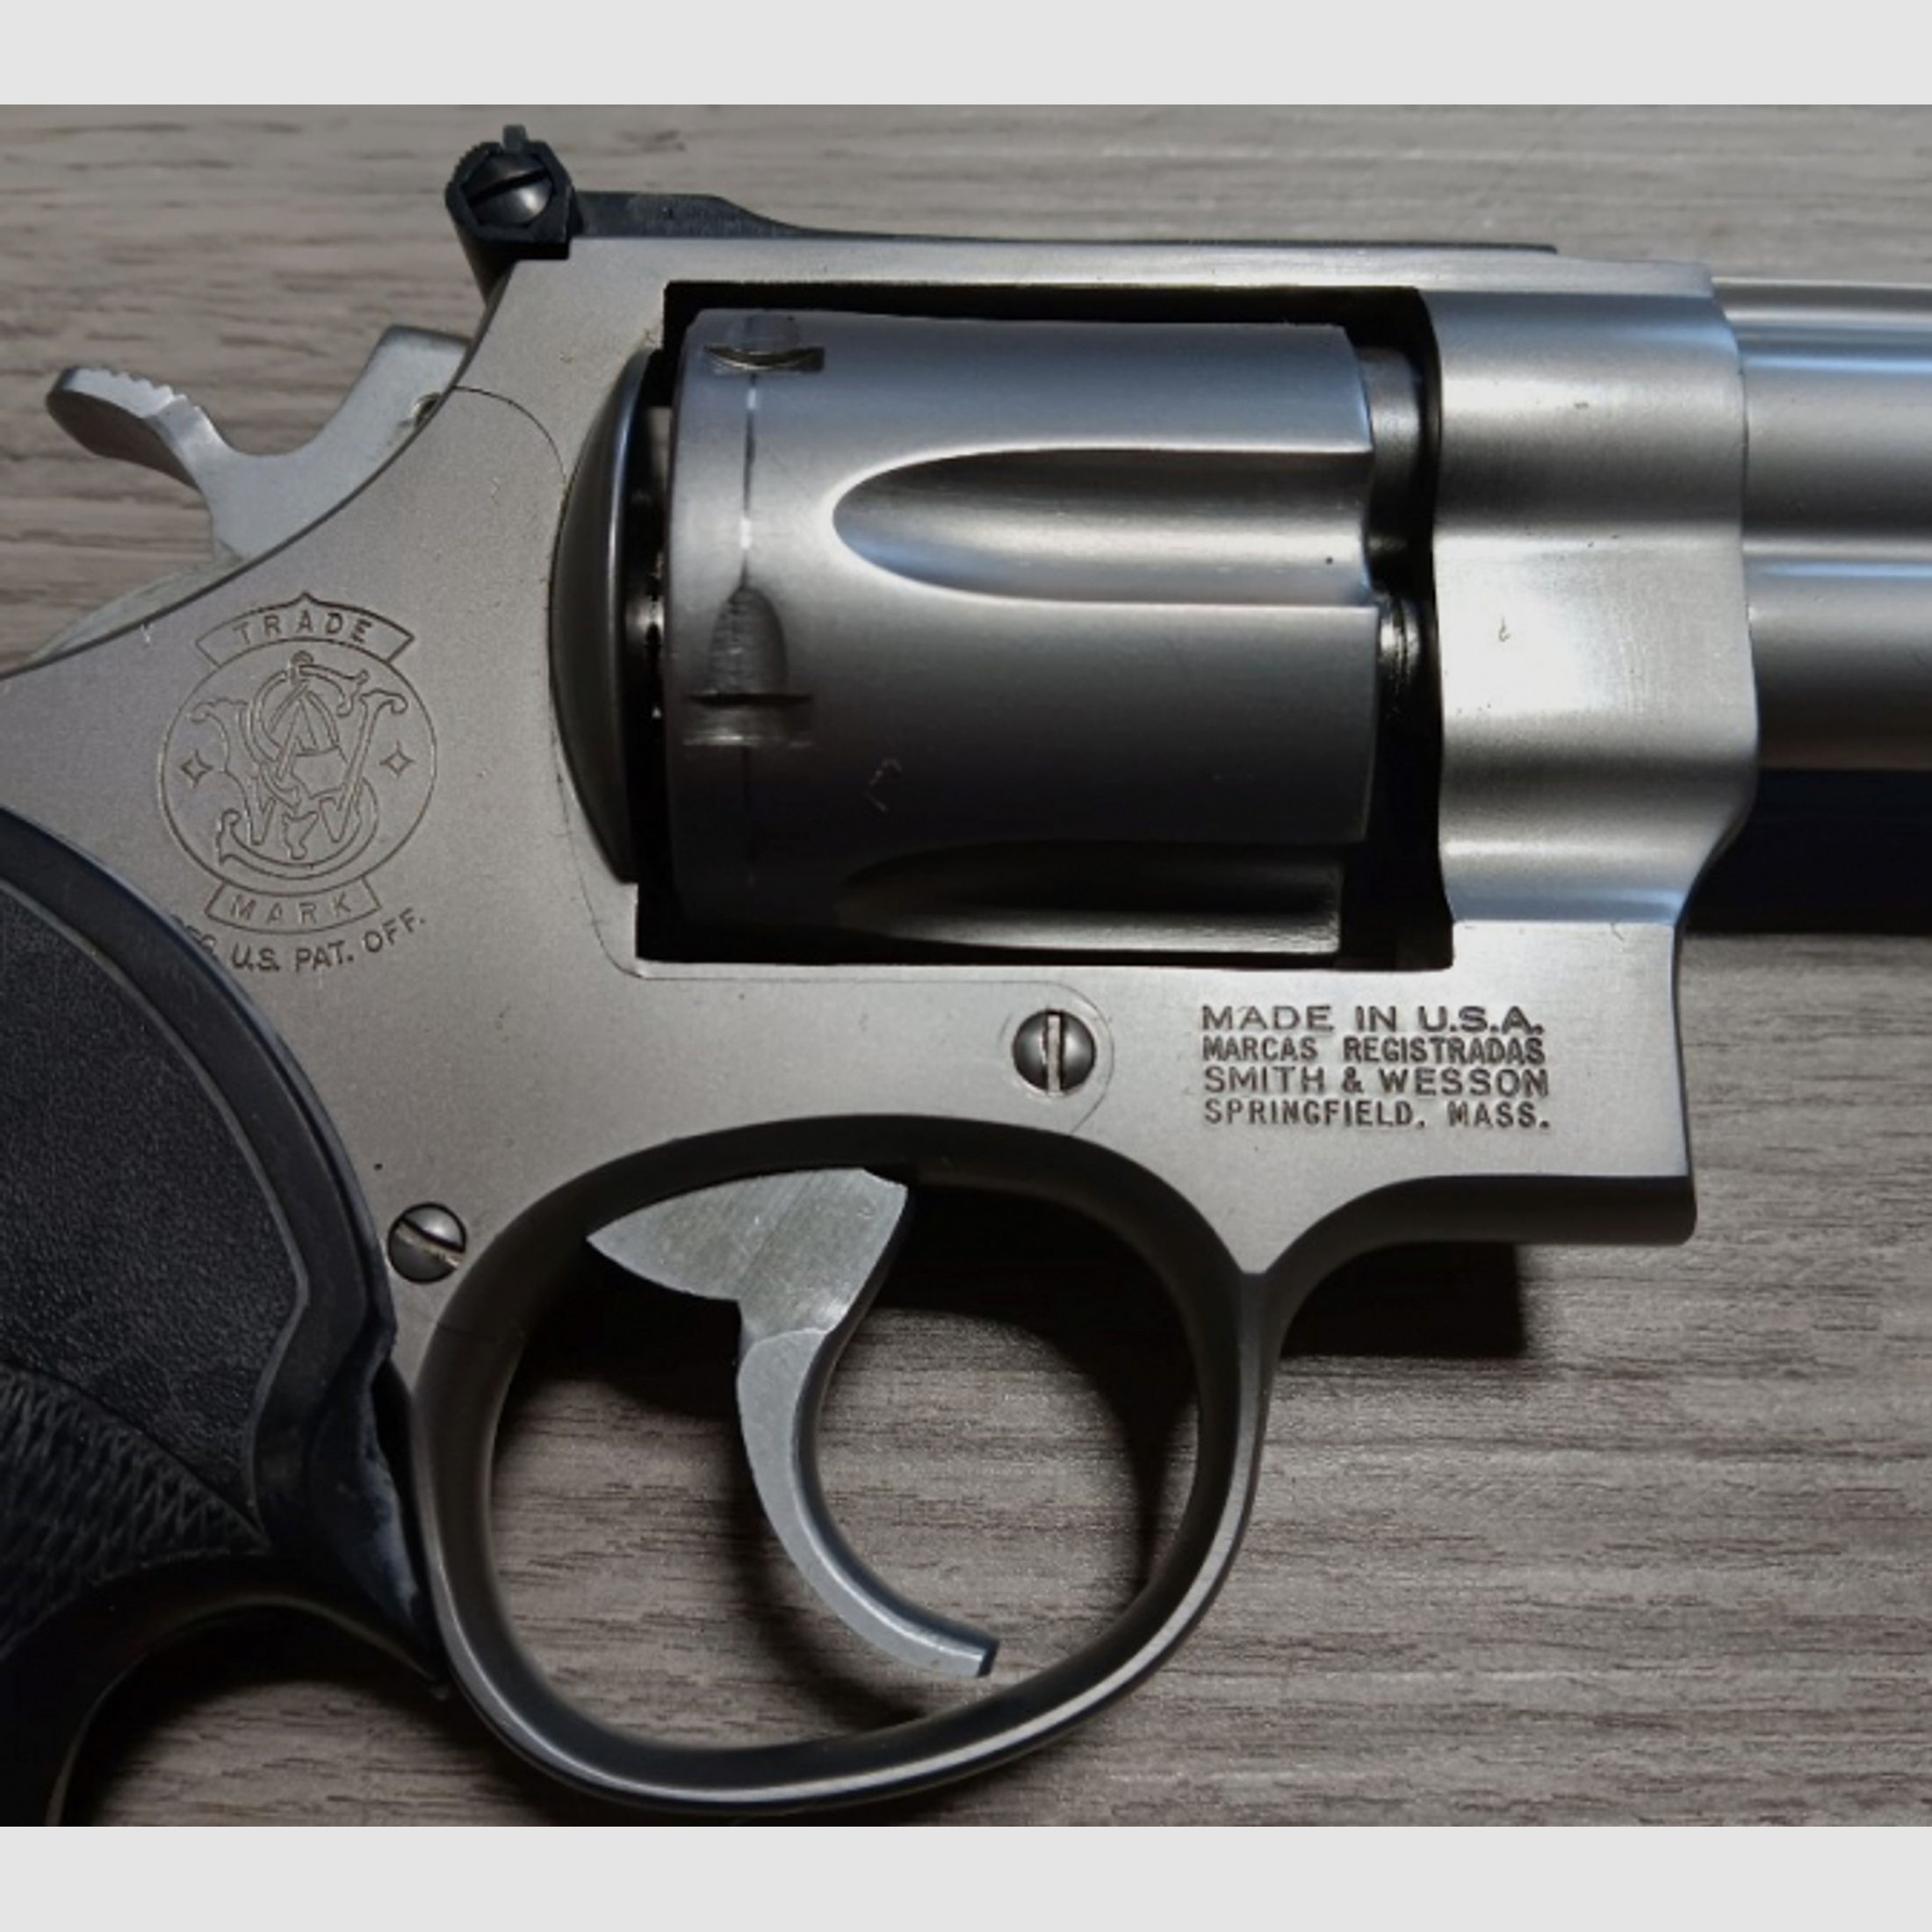 Smith and Wesson 625-2 Baujahr 1988